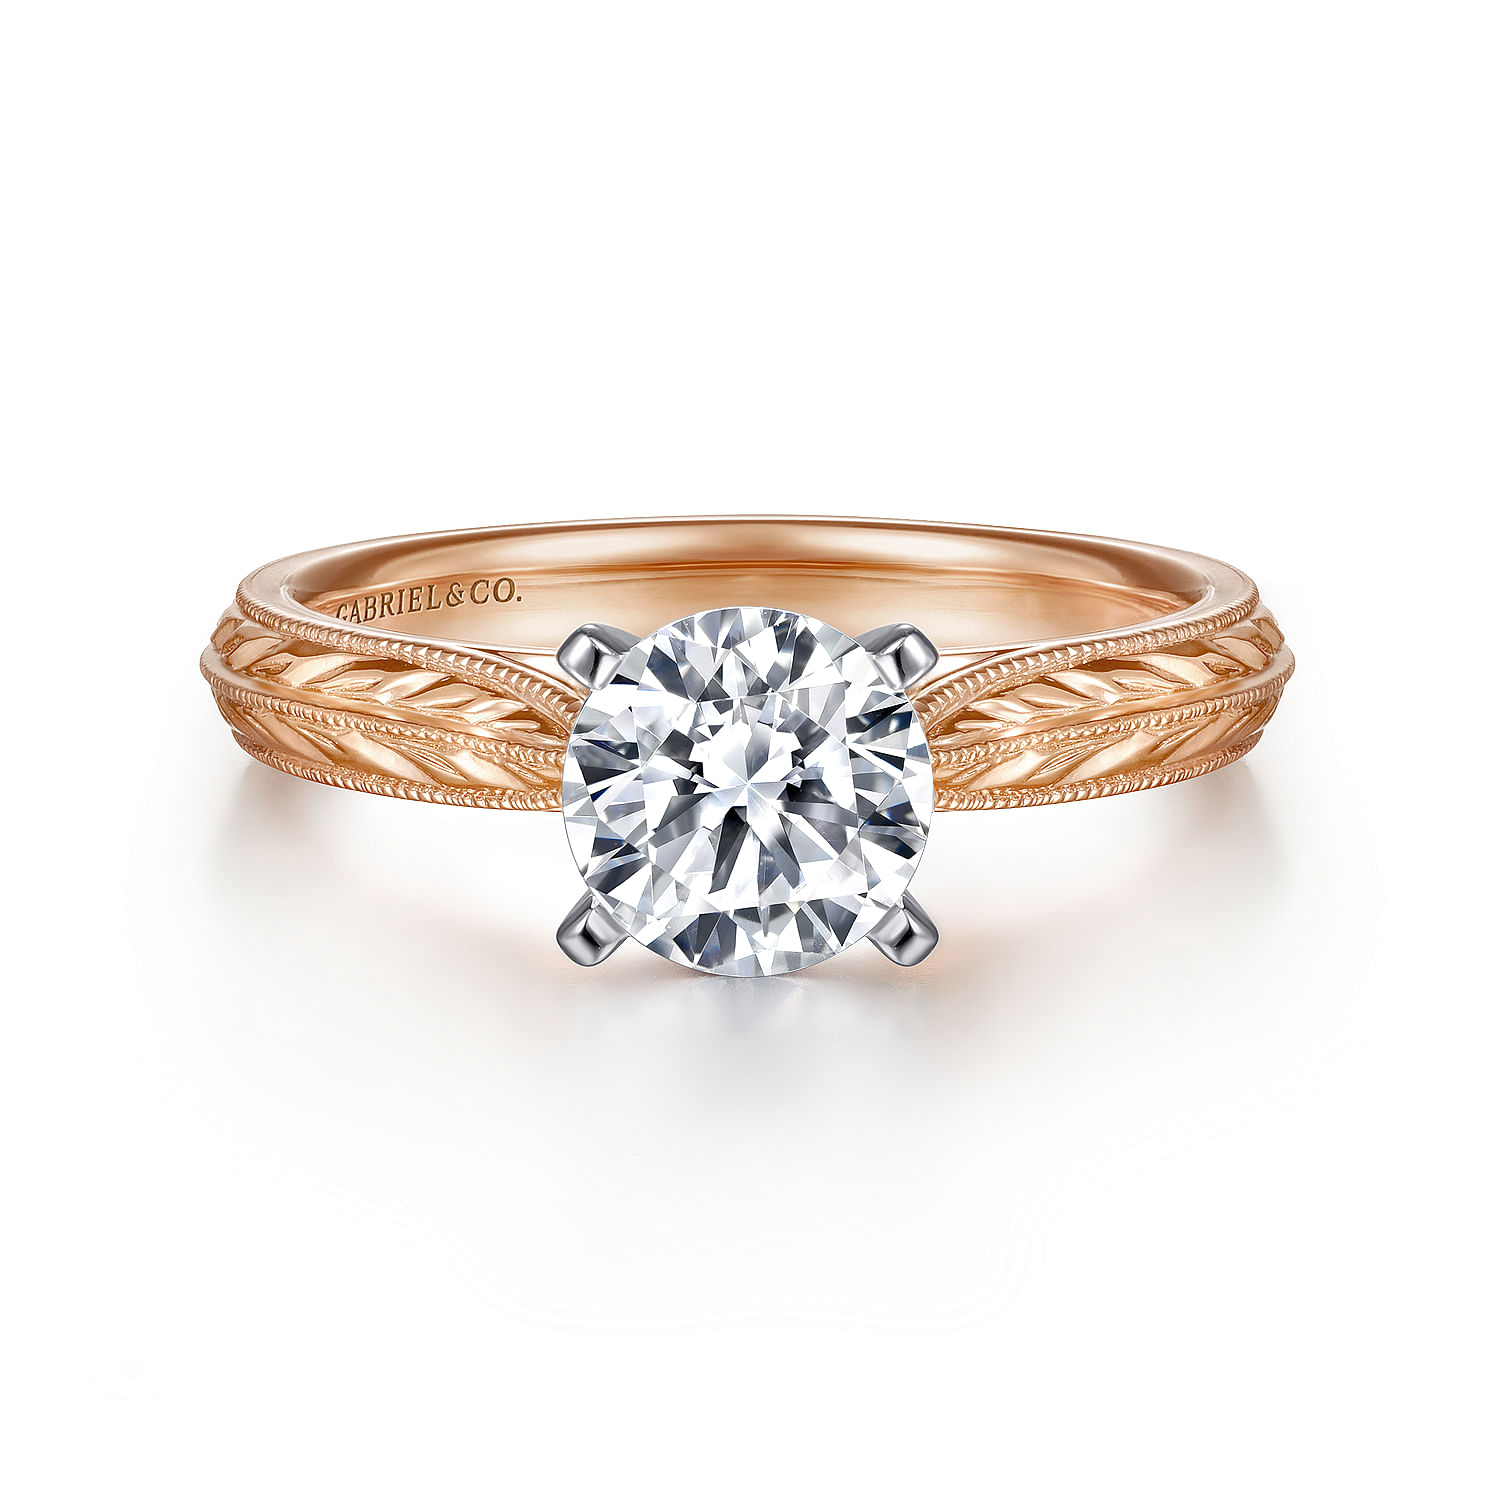 Vintage Inspired 14K White-Rose Gold Round Solitaire Engagement Ring